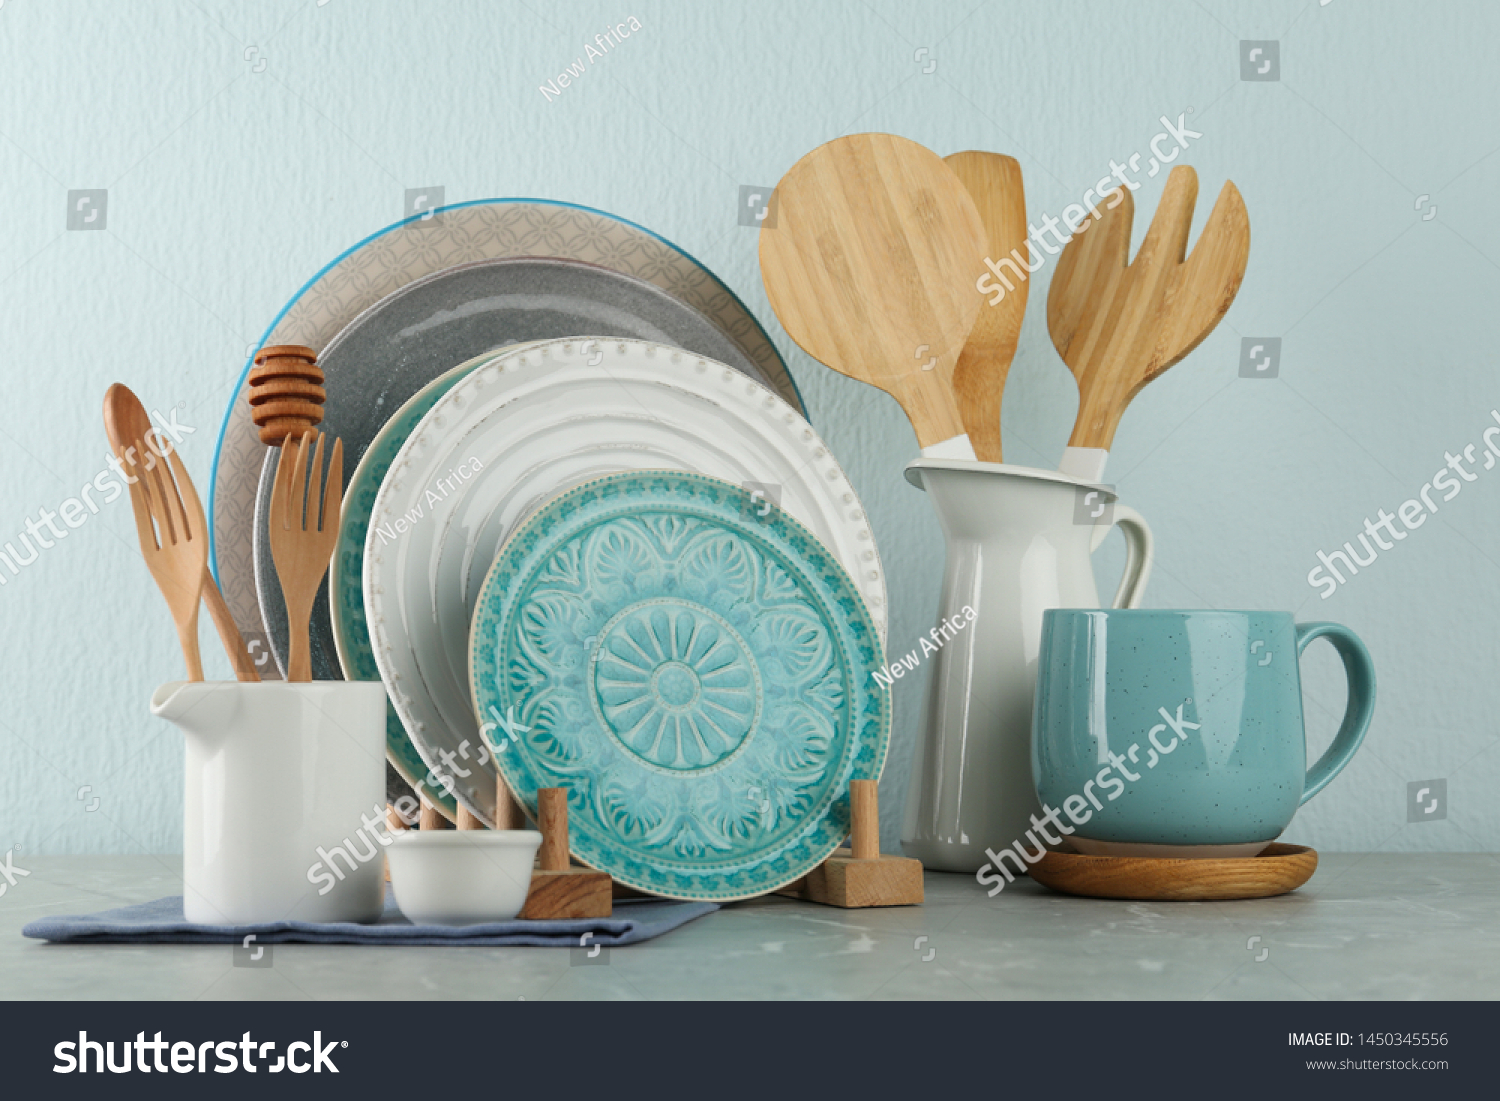 Set of kitchenware on grey marble table near light wall. Modern interior design #1450345556